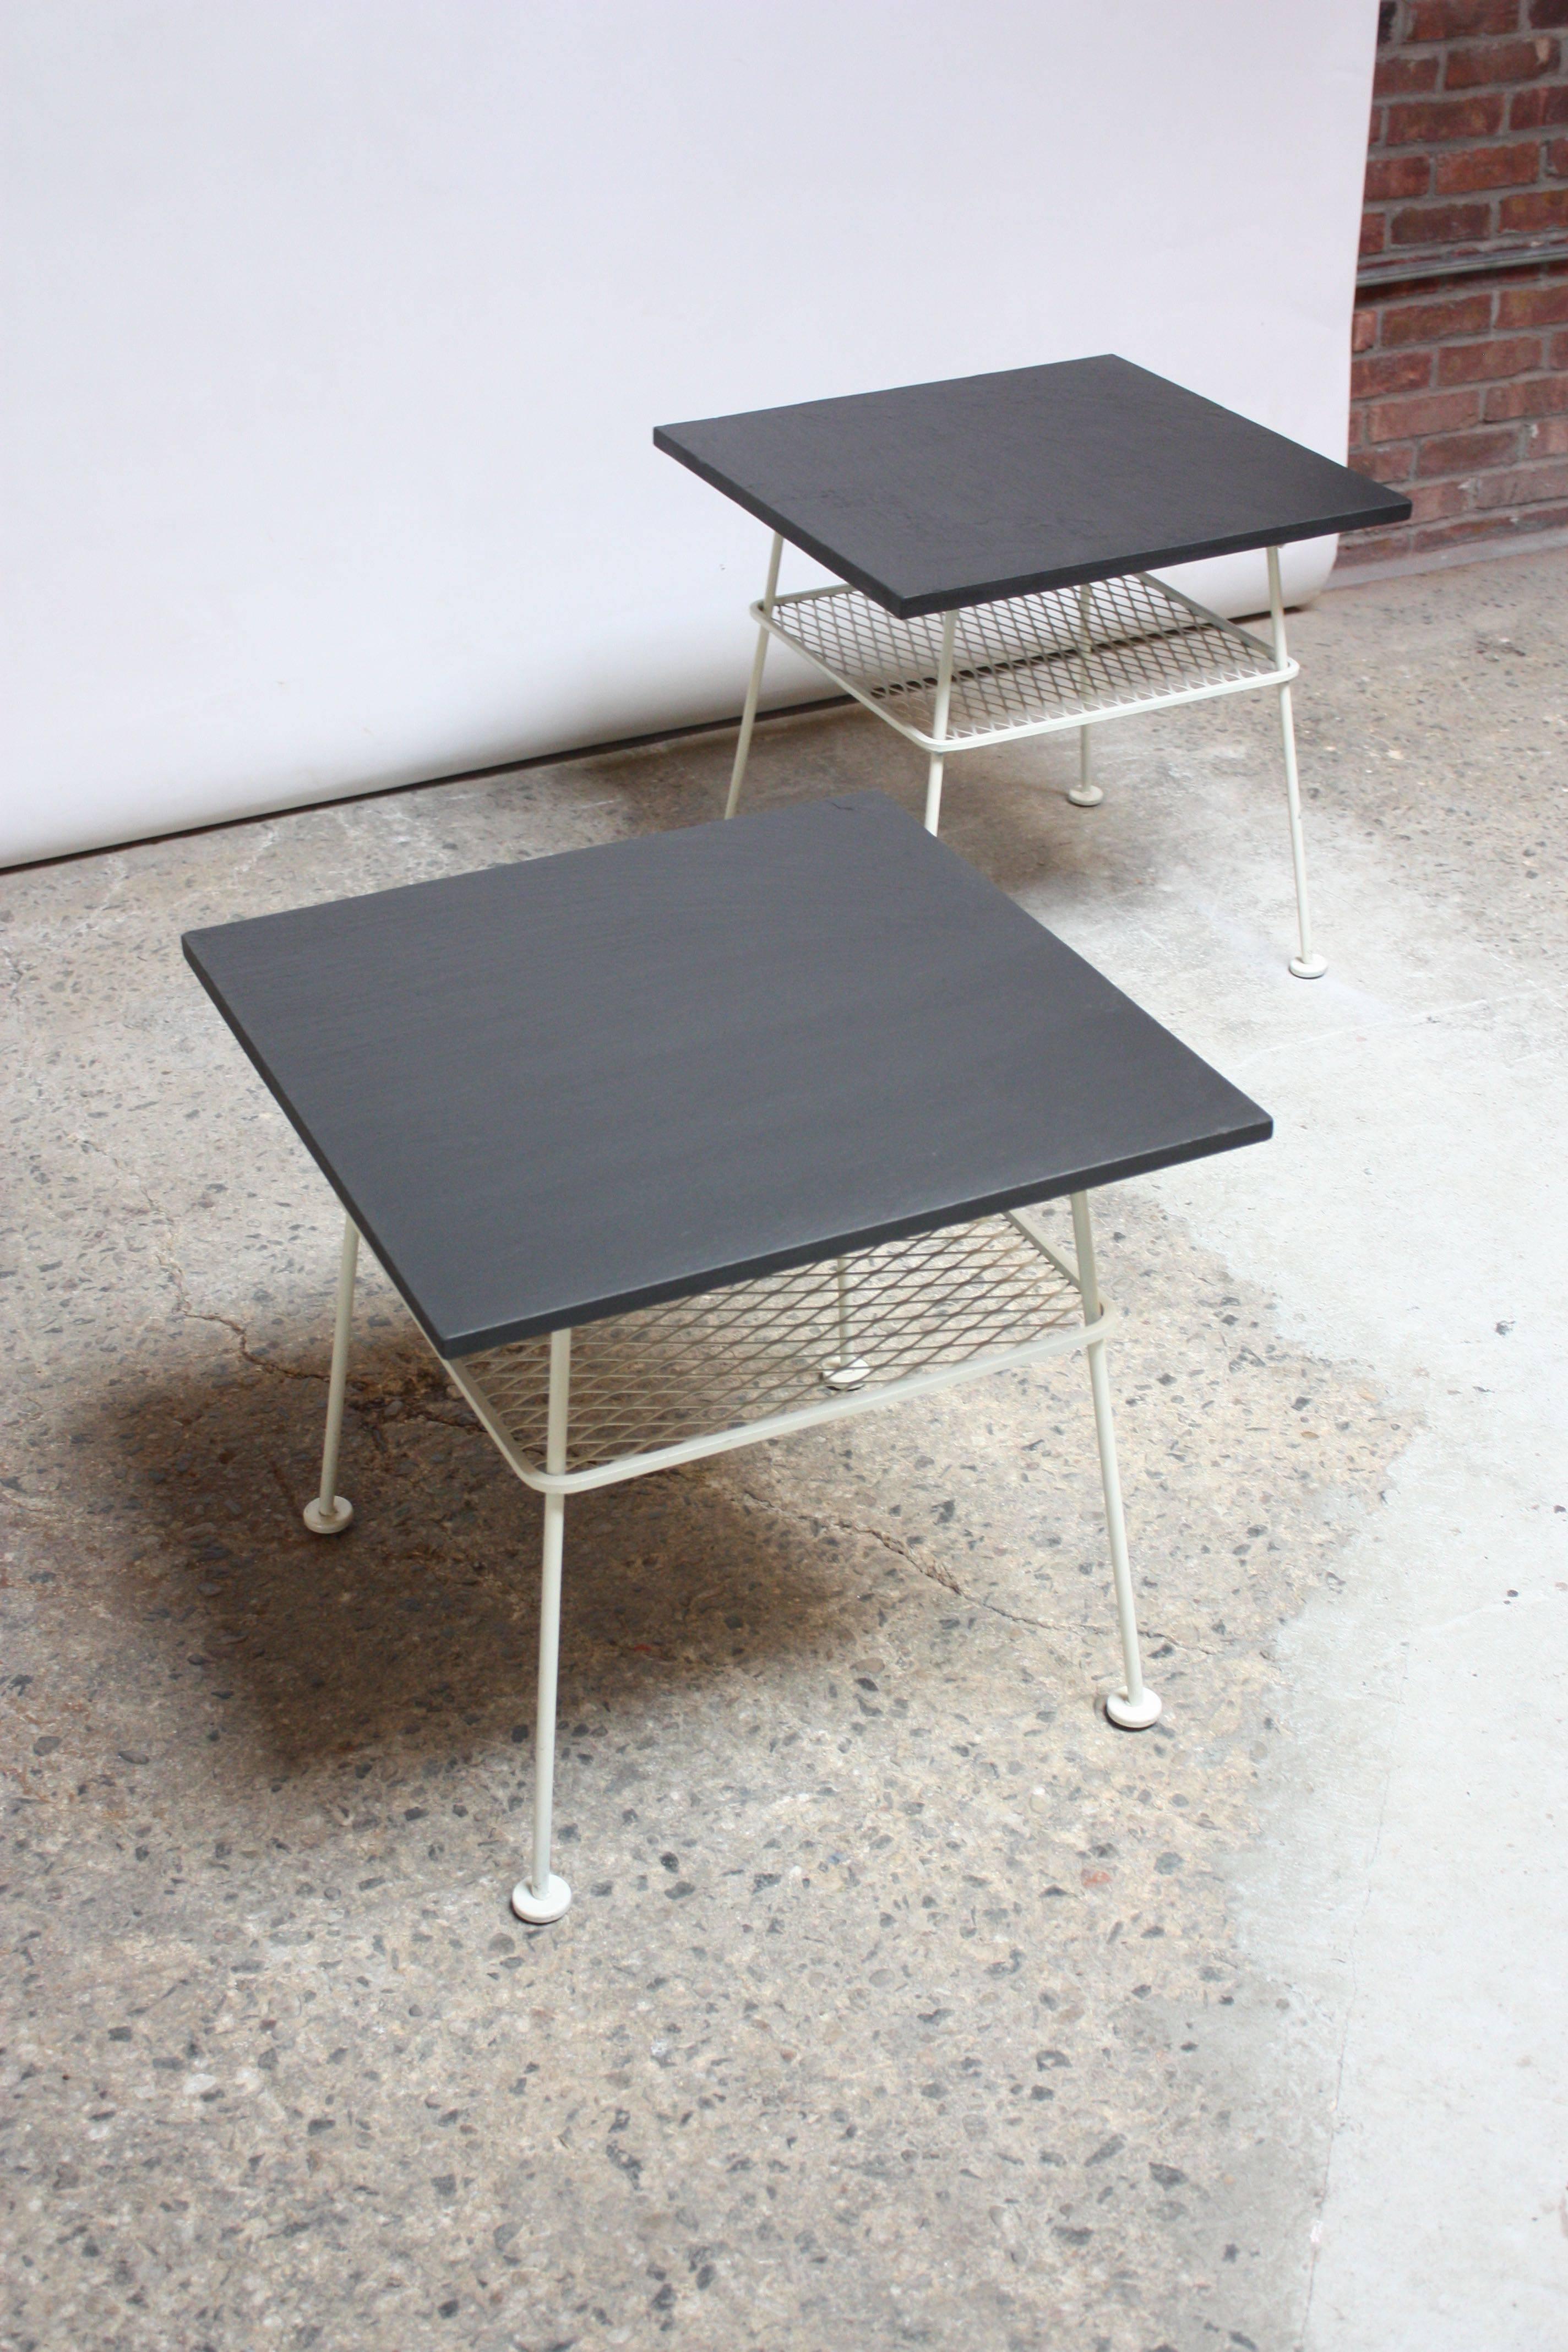 These uncommon side tables were designed in the 1950s by Russell Woodard as part of his 'Sculpura' Line. The tops are solid slate, and the wrought iron frames are an off-white with a mesh lower tier. 
These are in excellent, original shape with